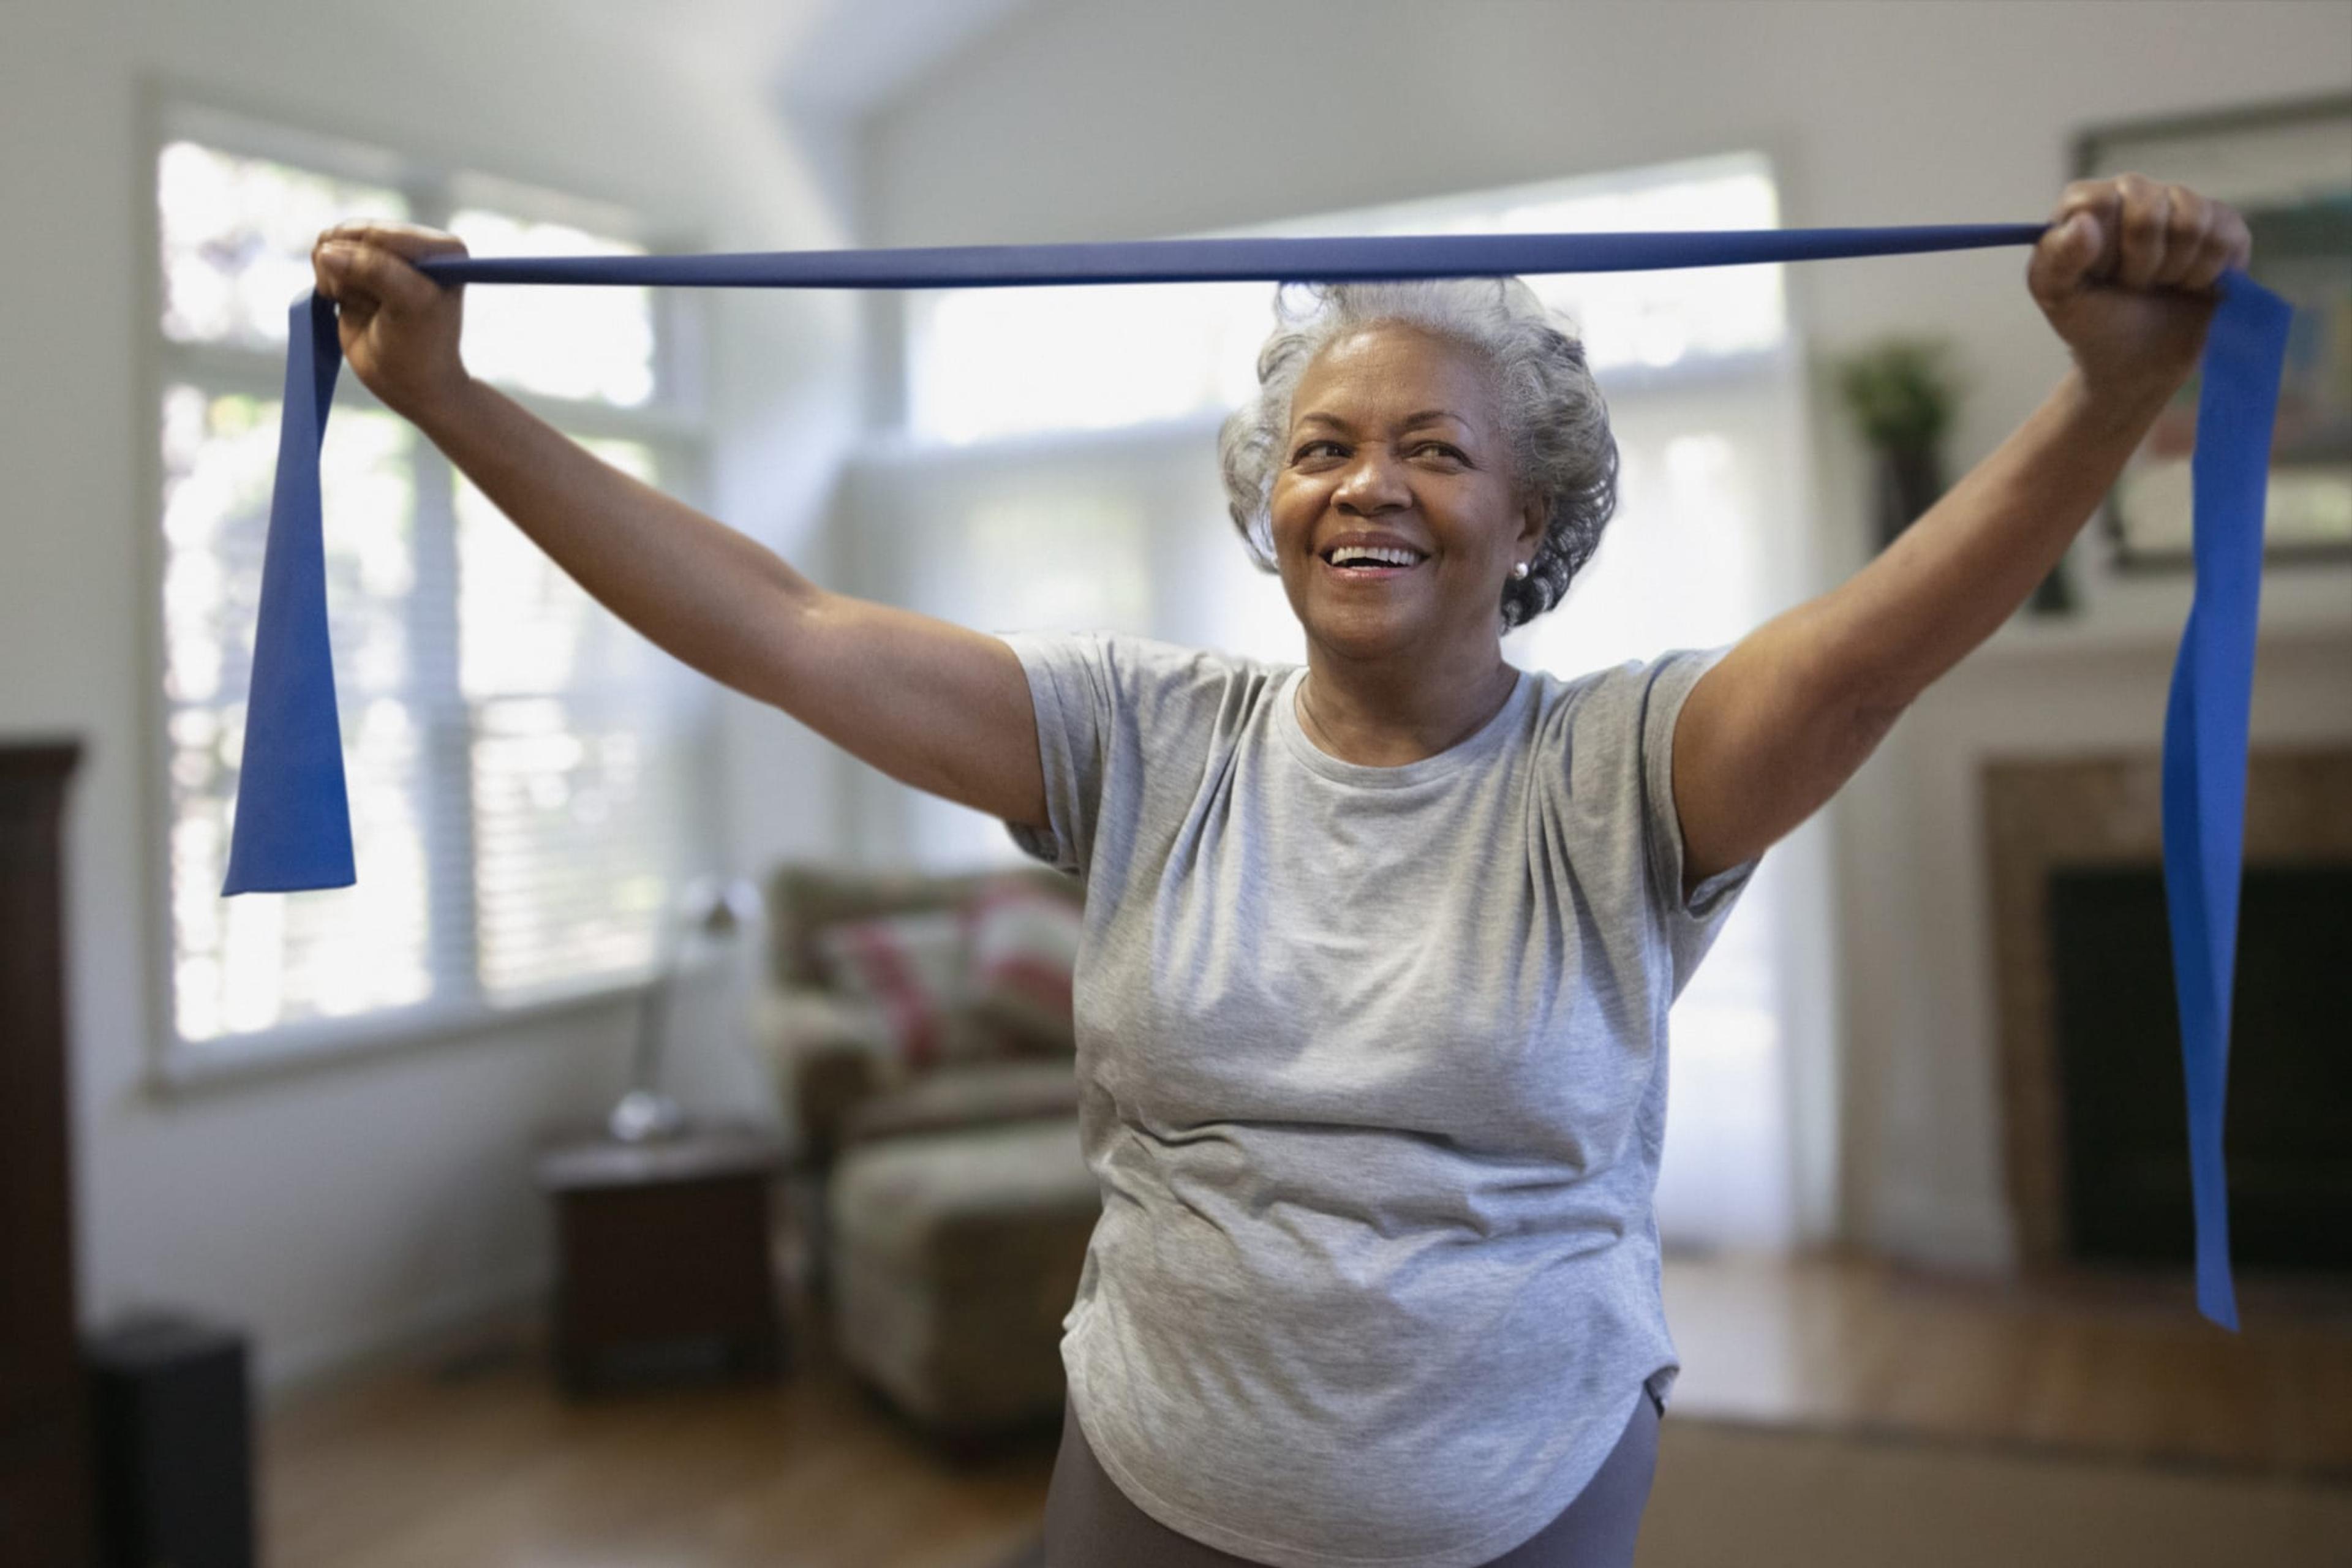 Senior Black woman stretches in her home